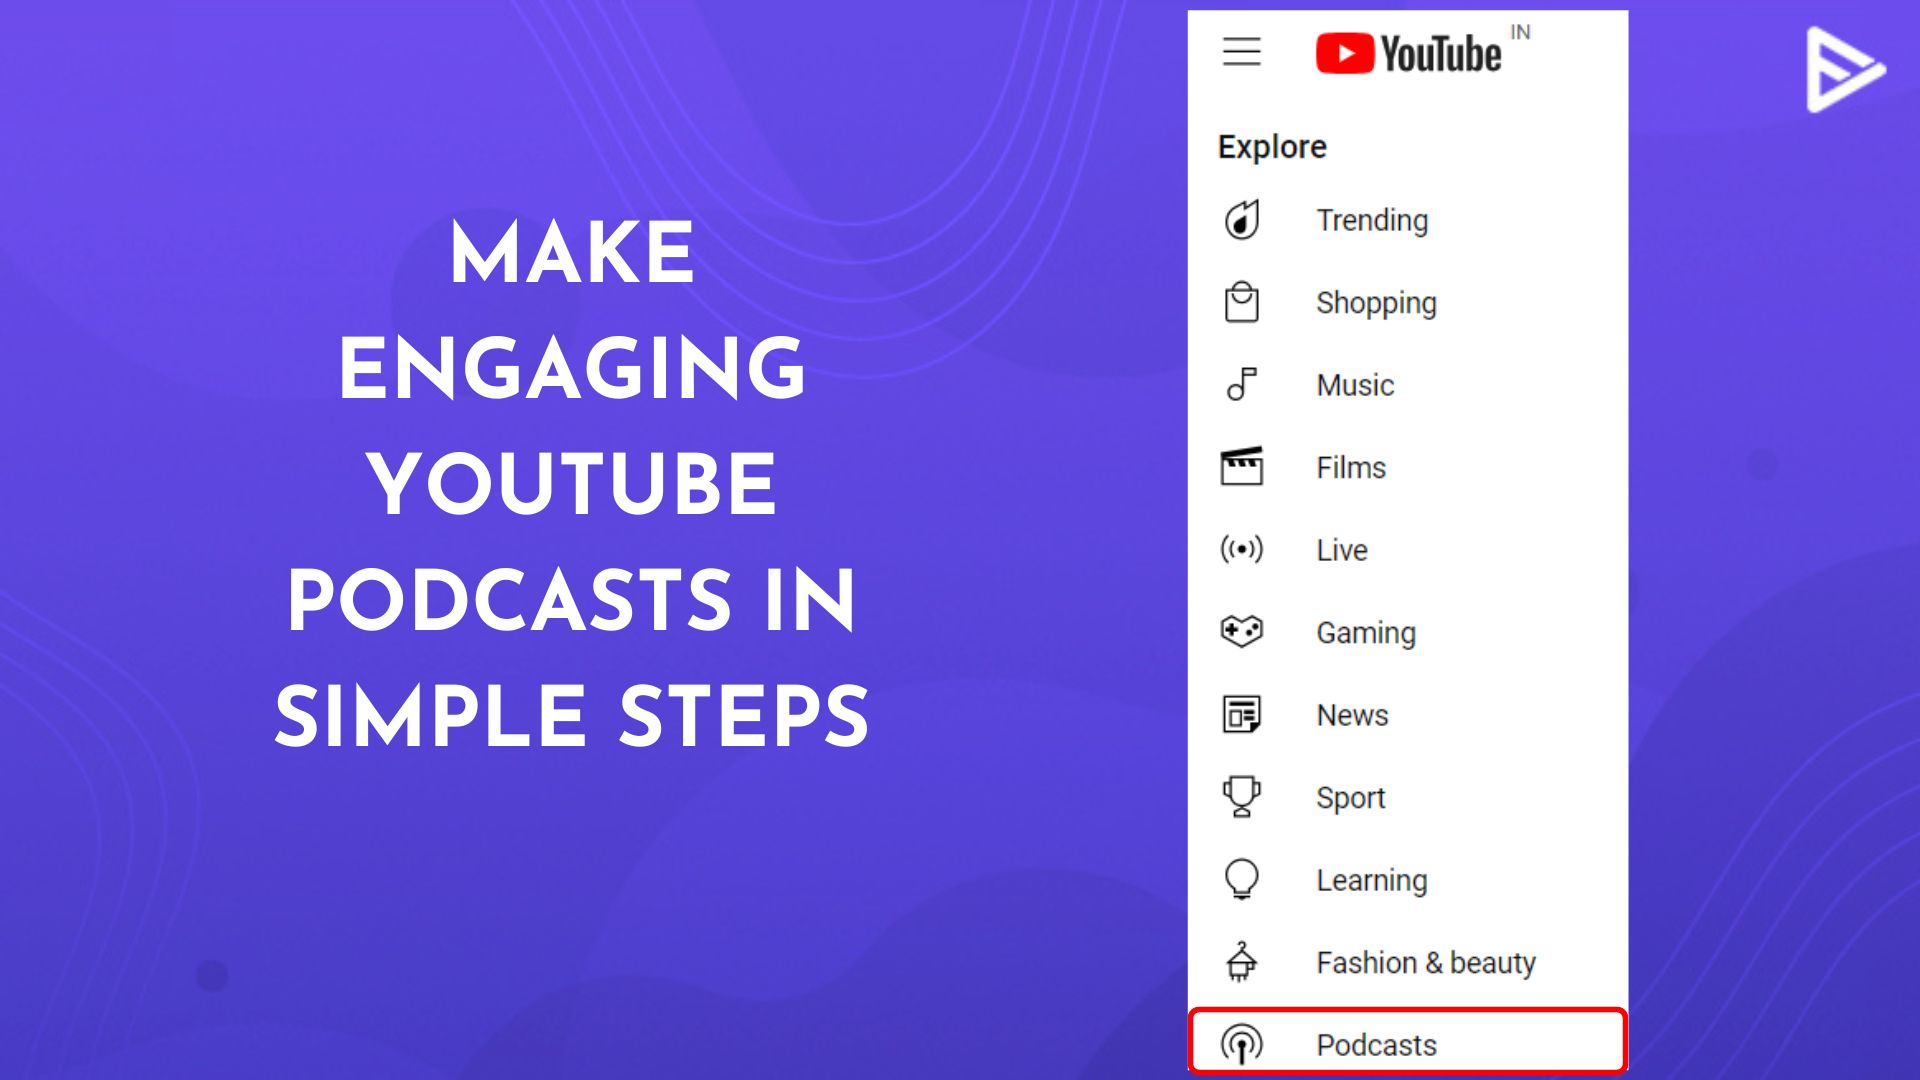 How to Start a YouTube podcast in simple steps